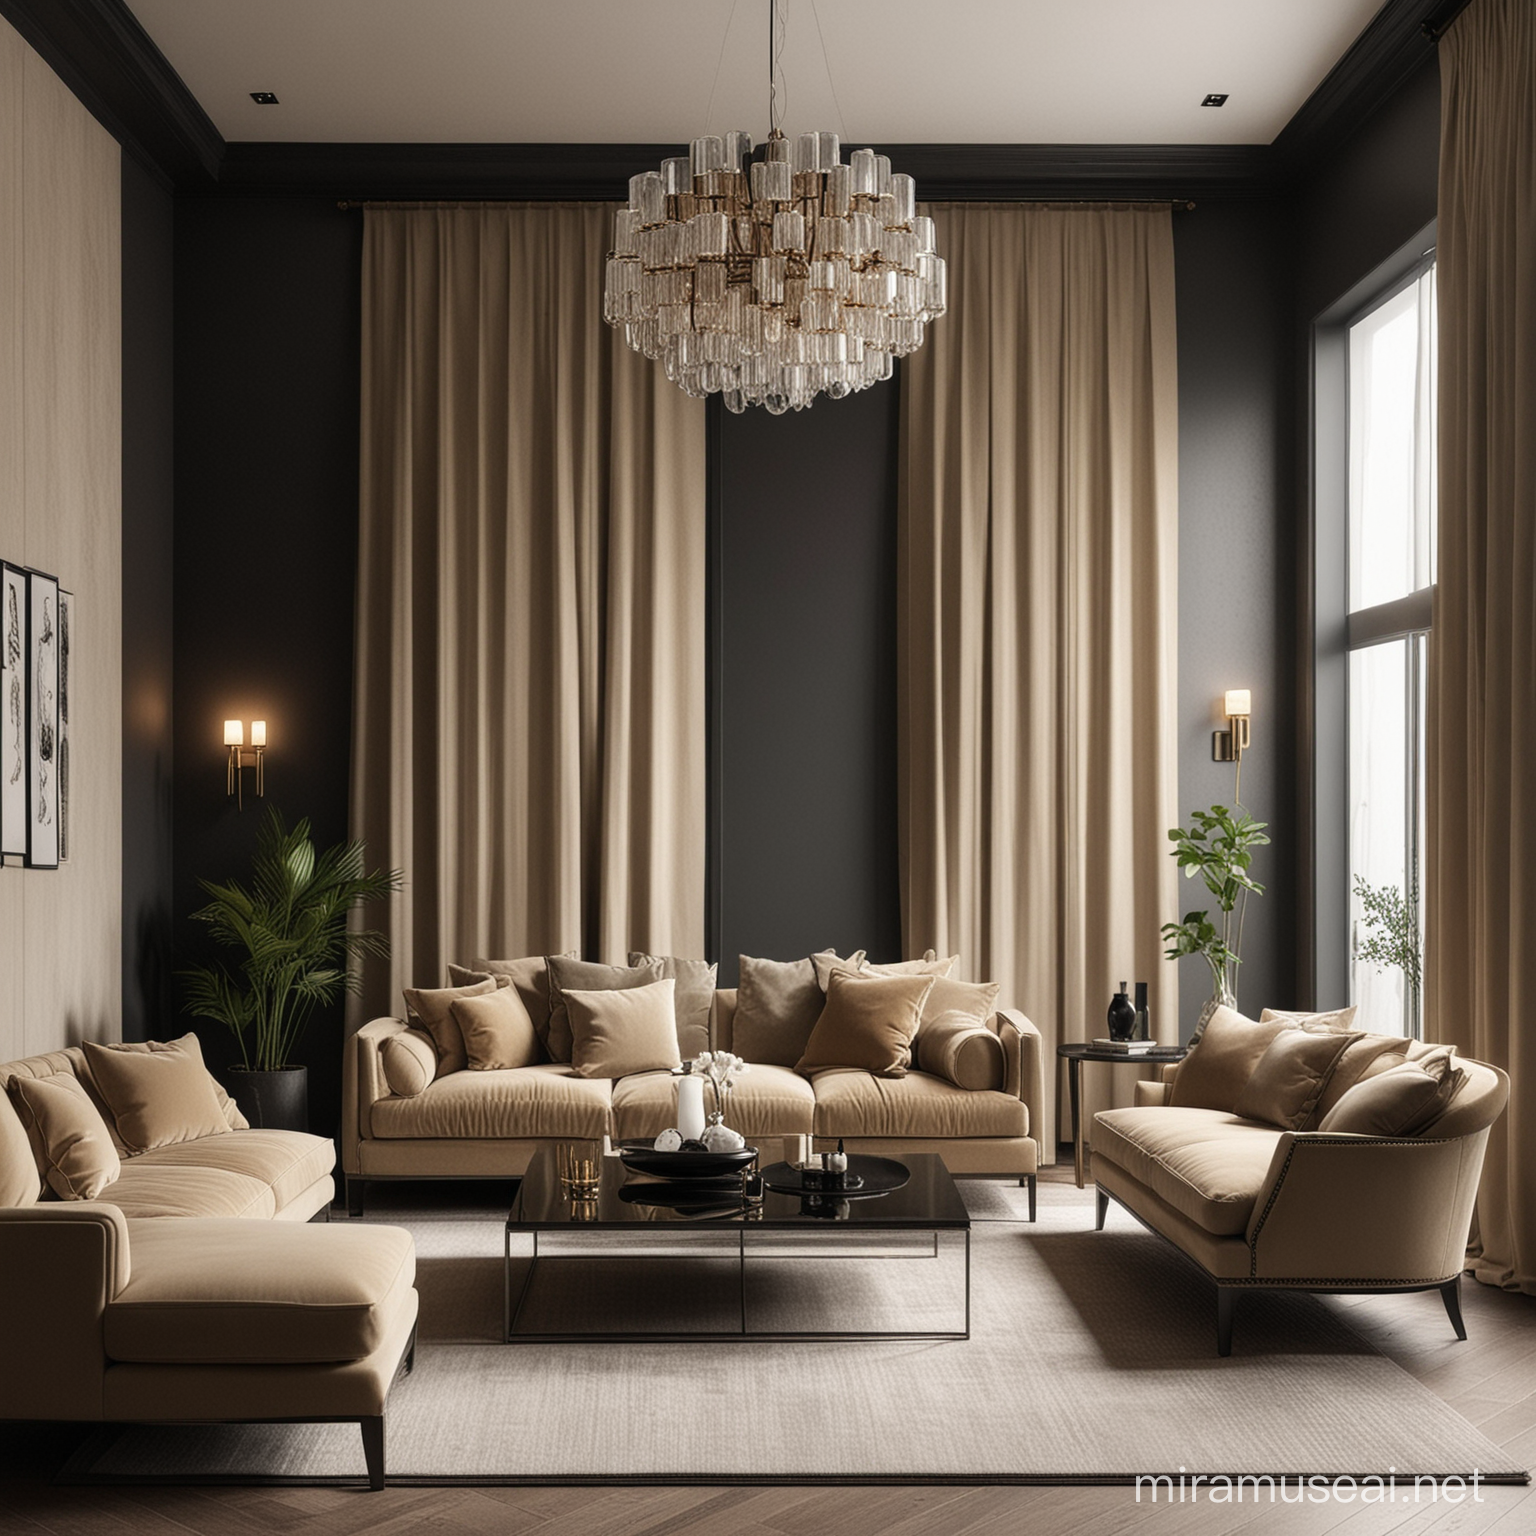 Contemporary Black and Khaki Interior Design with Architectural Aesthetic